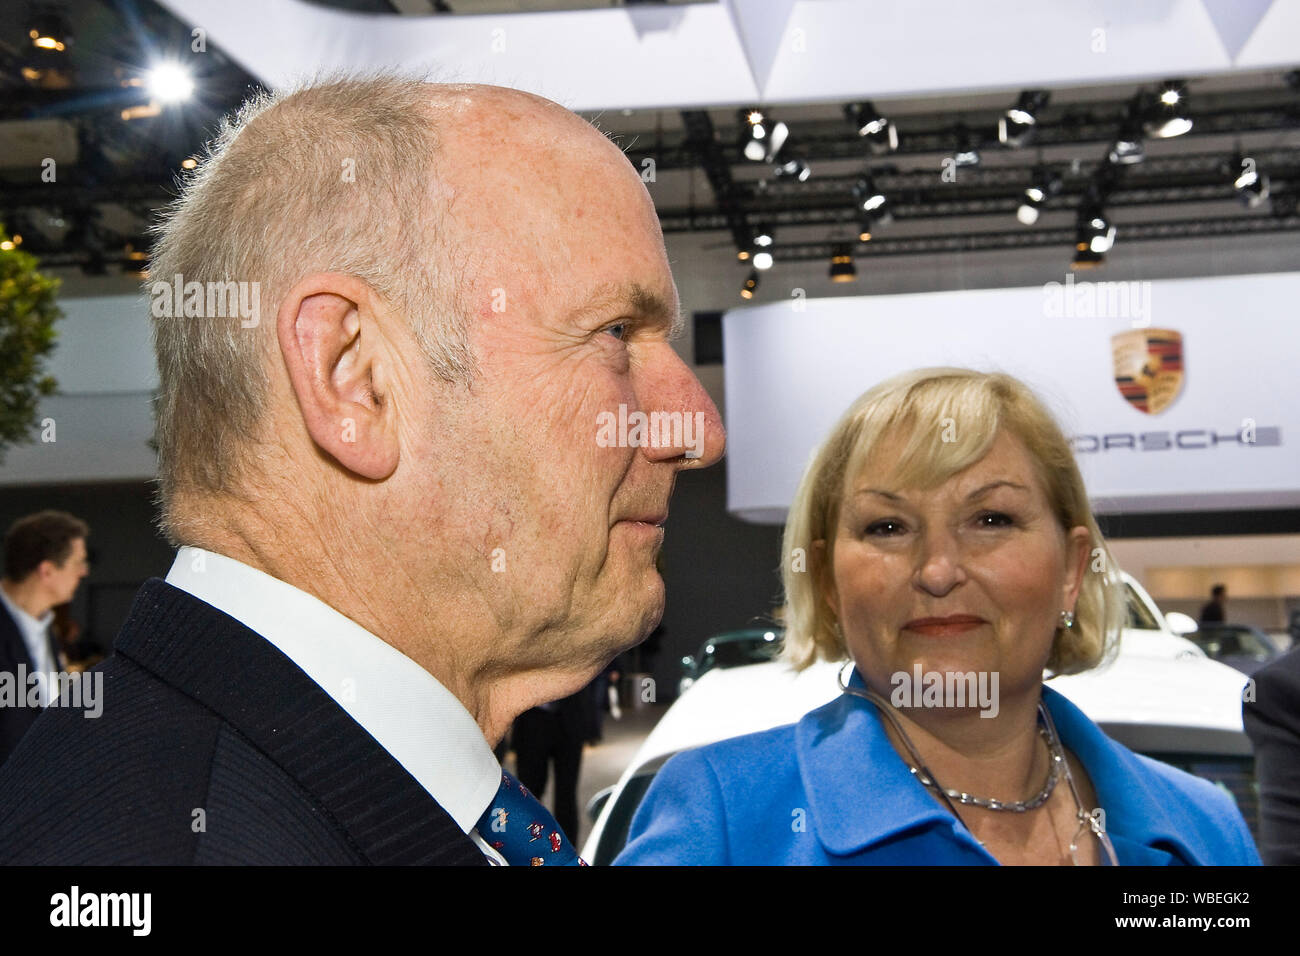 Hamburg, Deutschland. 27th Aug, 2019. Ferdinand PIECH died at the age of 82 years. Archive photo: Ferdinand PIECH (Chairman of the Supervisory Board) with his wife Ursula, Portrait, with the Porsche logo behind them, Annual General Meeting of Volkswagen AG on April 22, 2010 in Hamburg | usage worldwide Credit: dpa/Alamy Live News Stock Photo